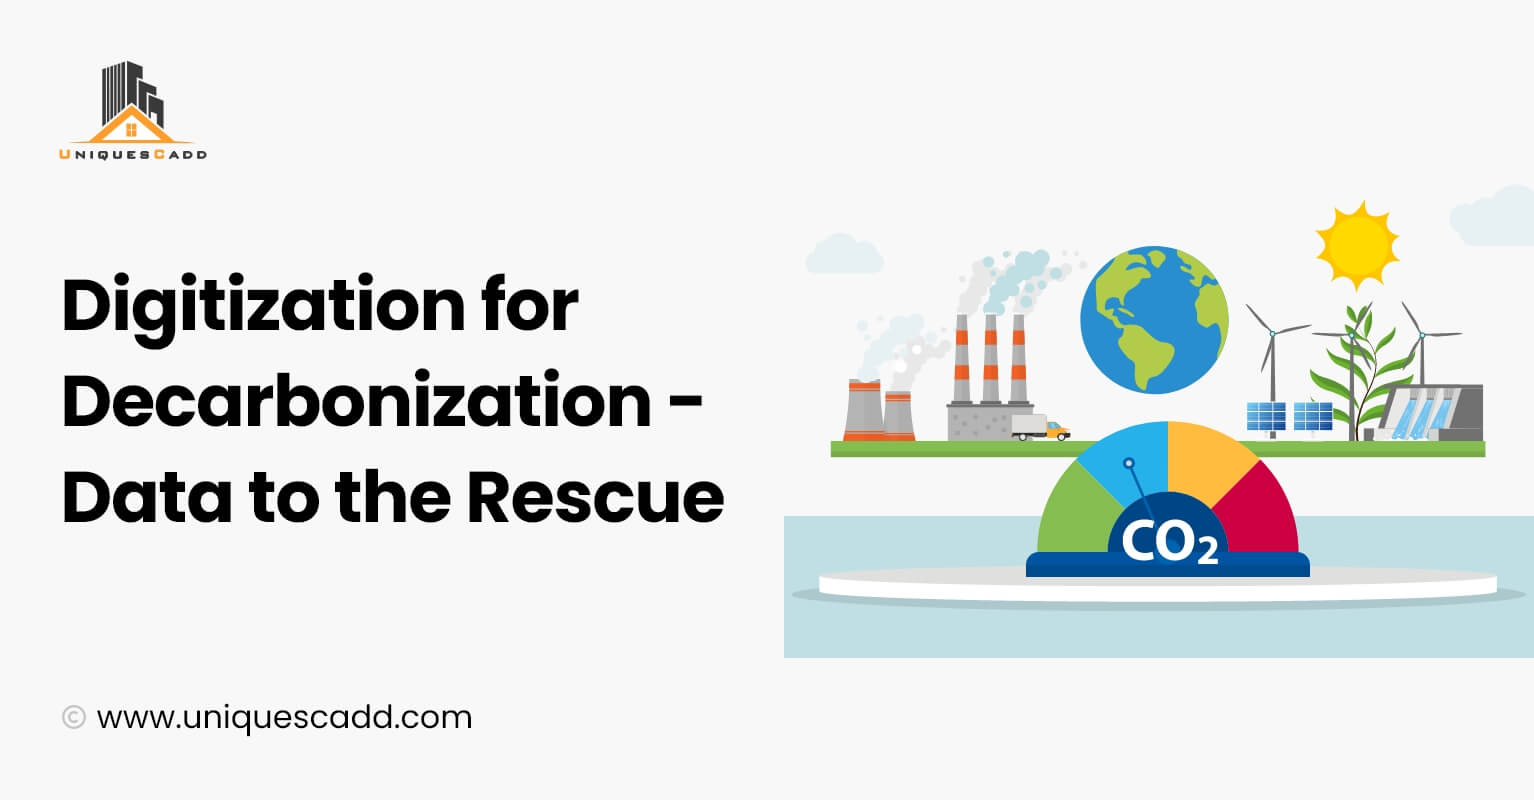 Digitization for Decarbonization - Data to the Rescue